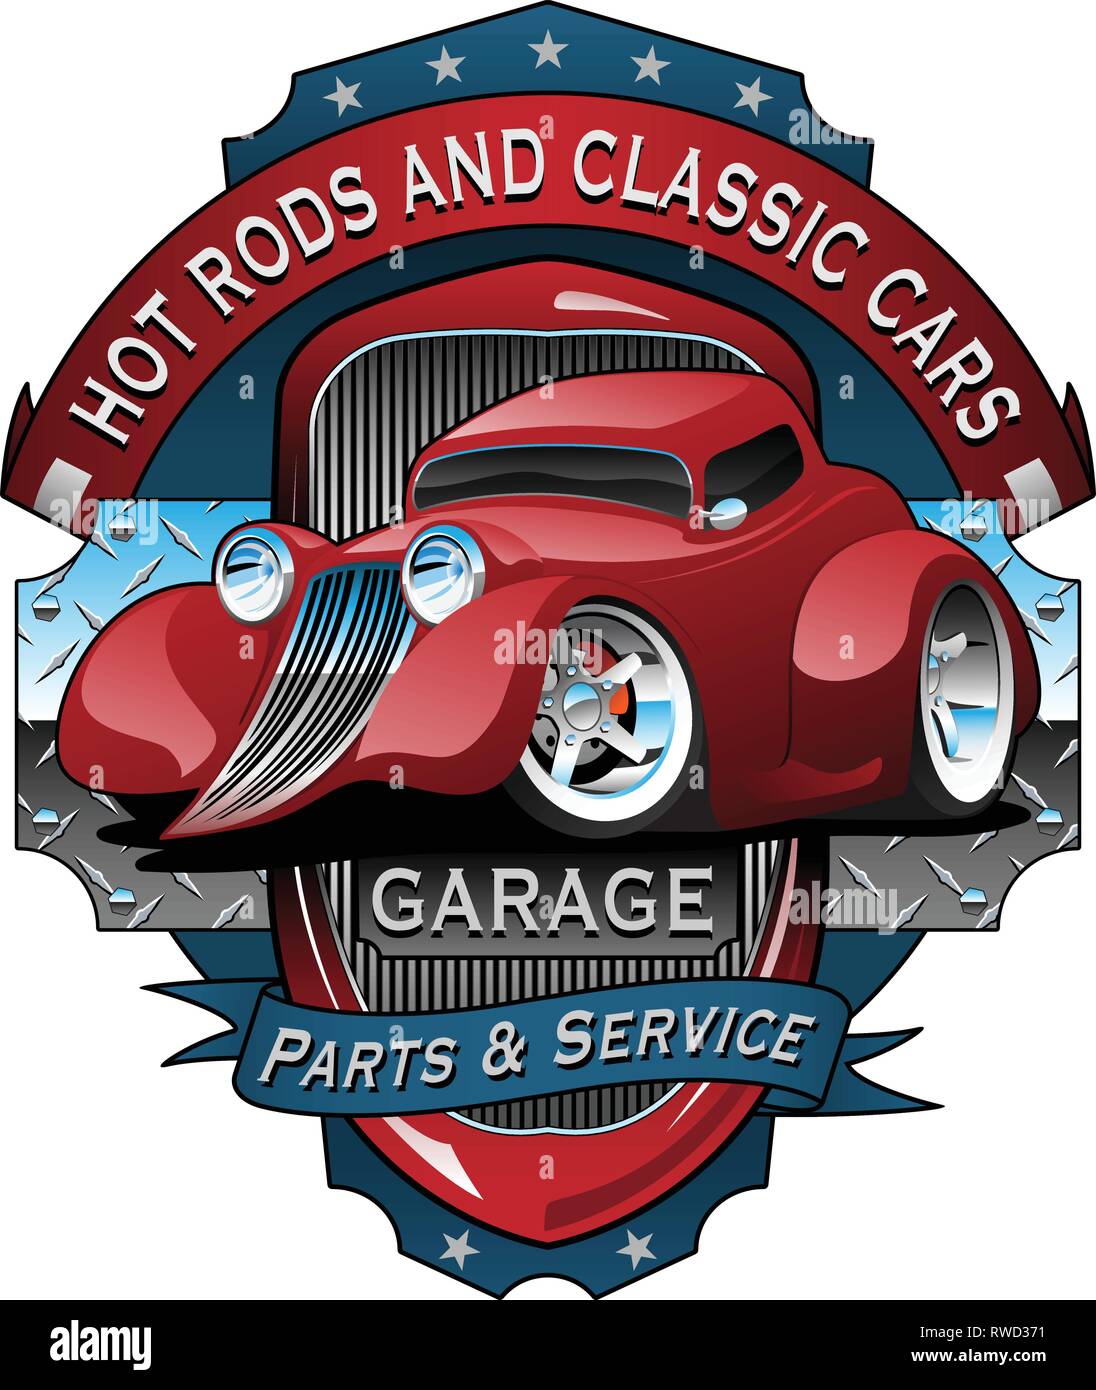 Hot Rods and Classic Cars Garage Vintage Sign Vector Illustration Stock Vector